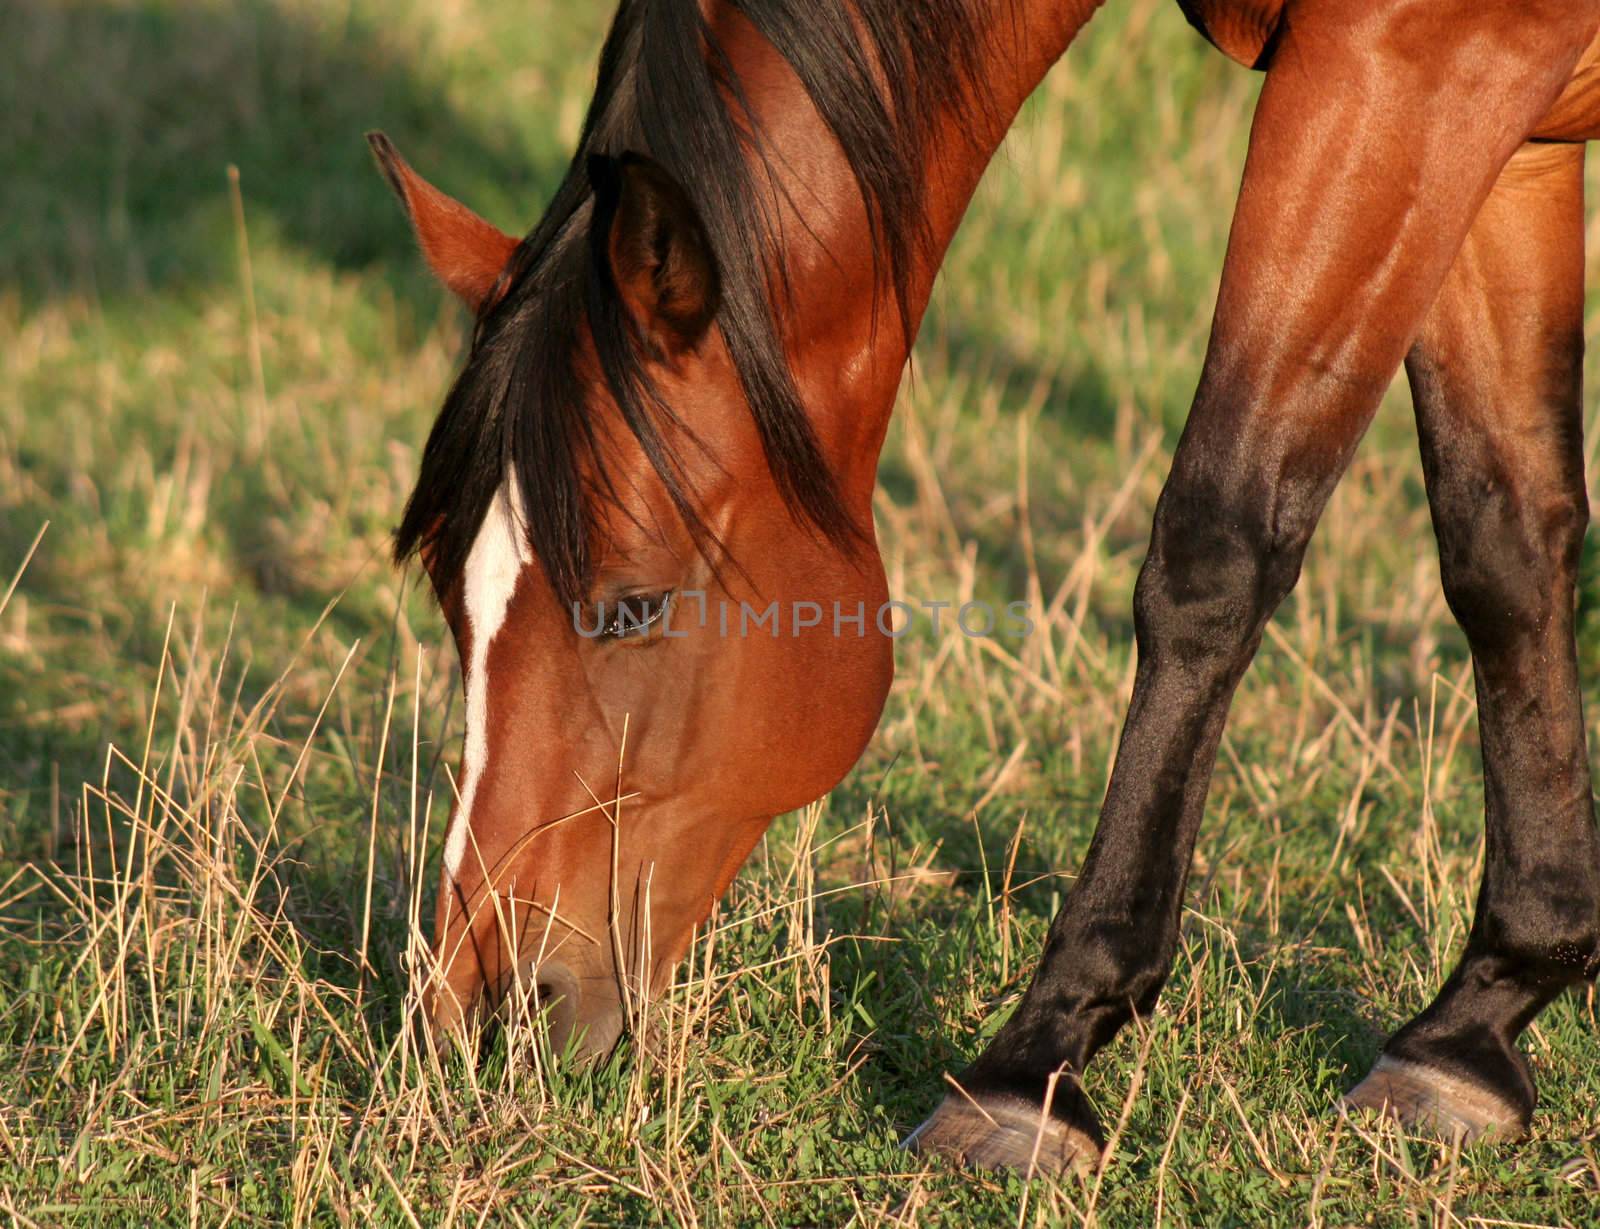 A beautiful redish brown horse feeds in the sunlight.